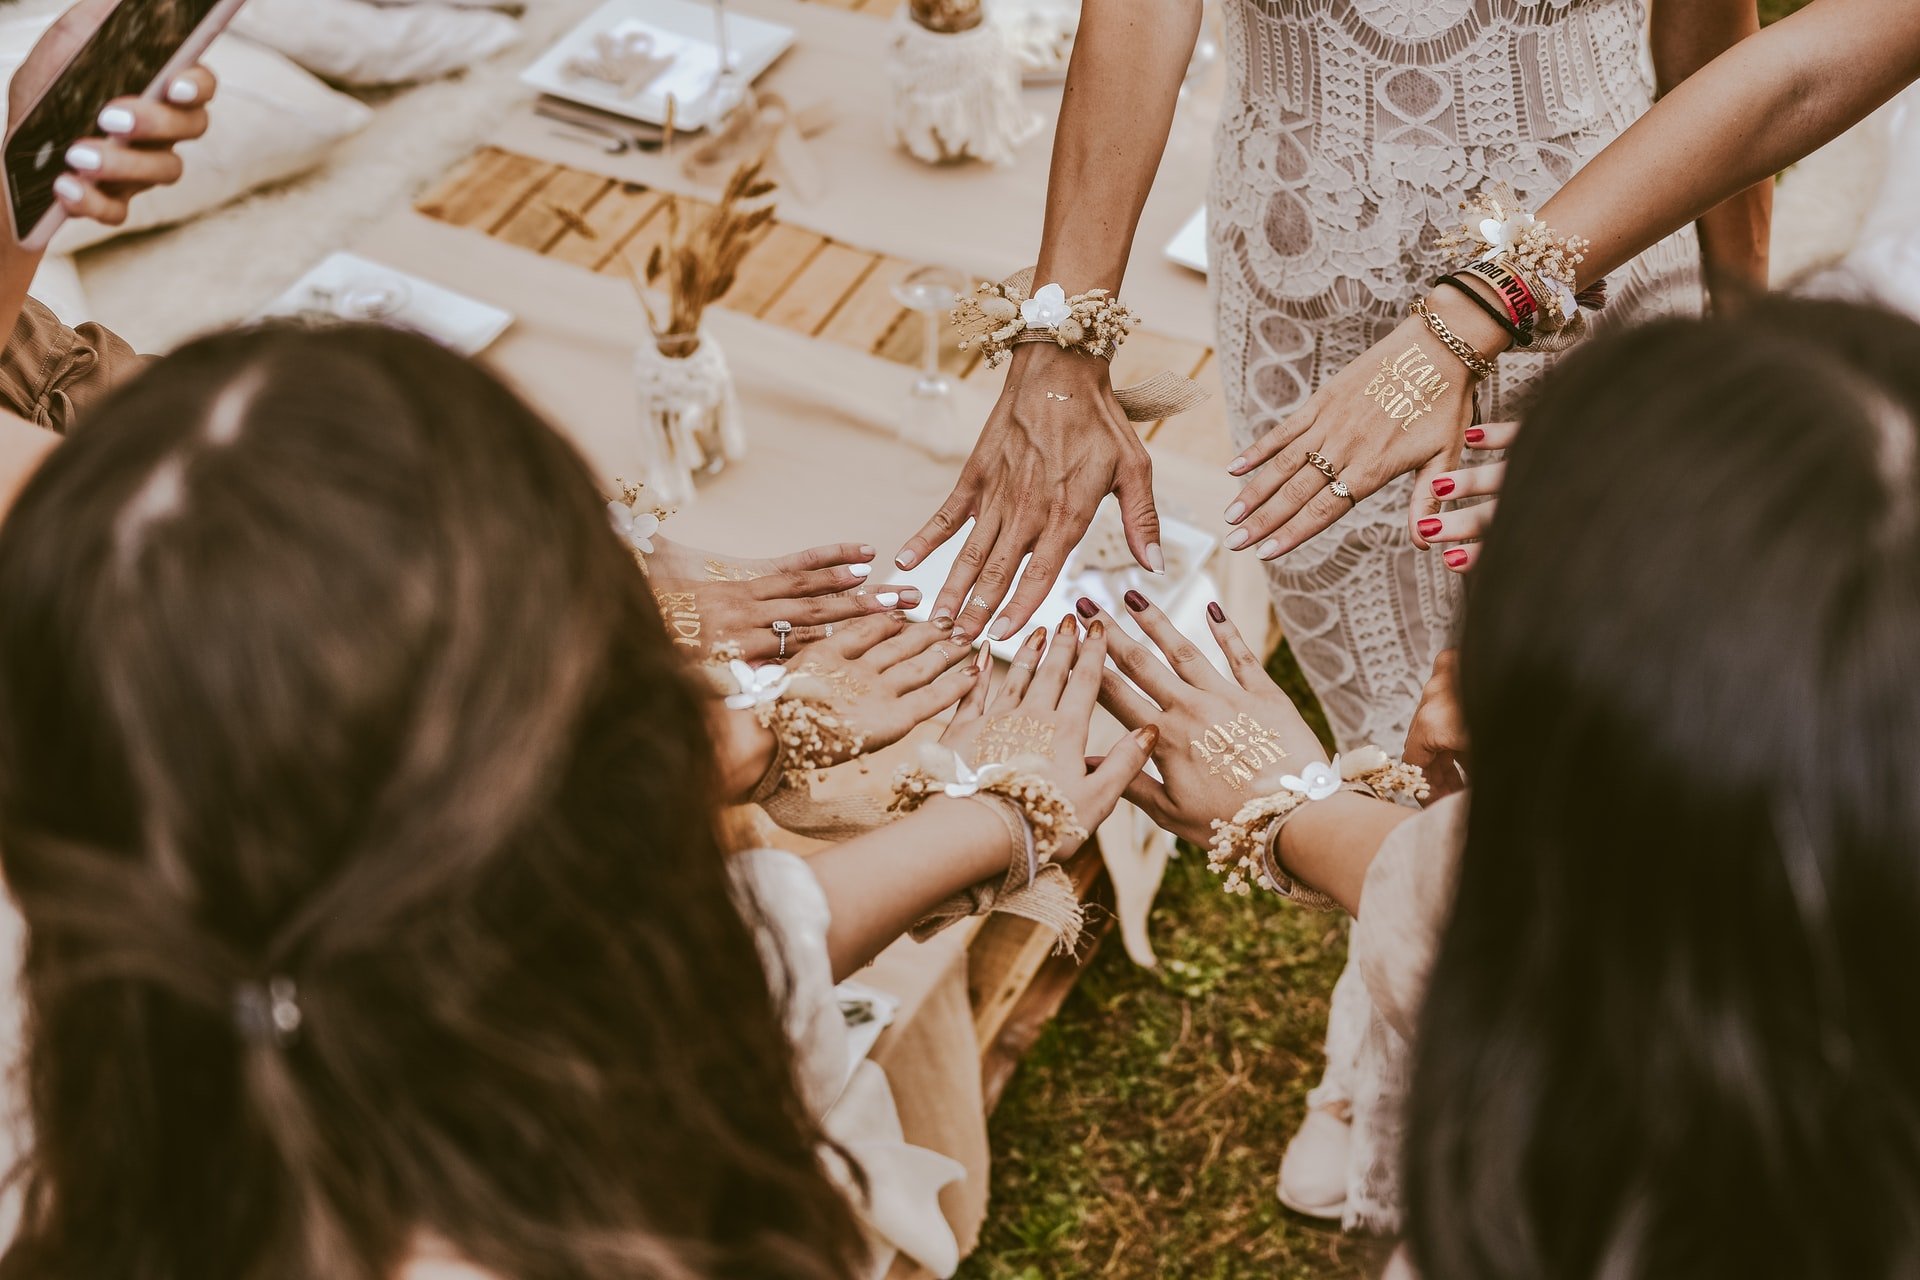 The woman wanted OP and her sister to be the bridesmaids | Source: Unsplash